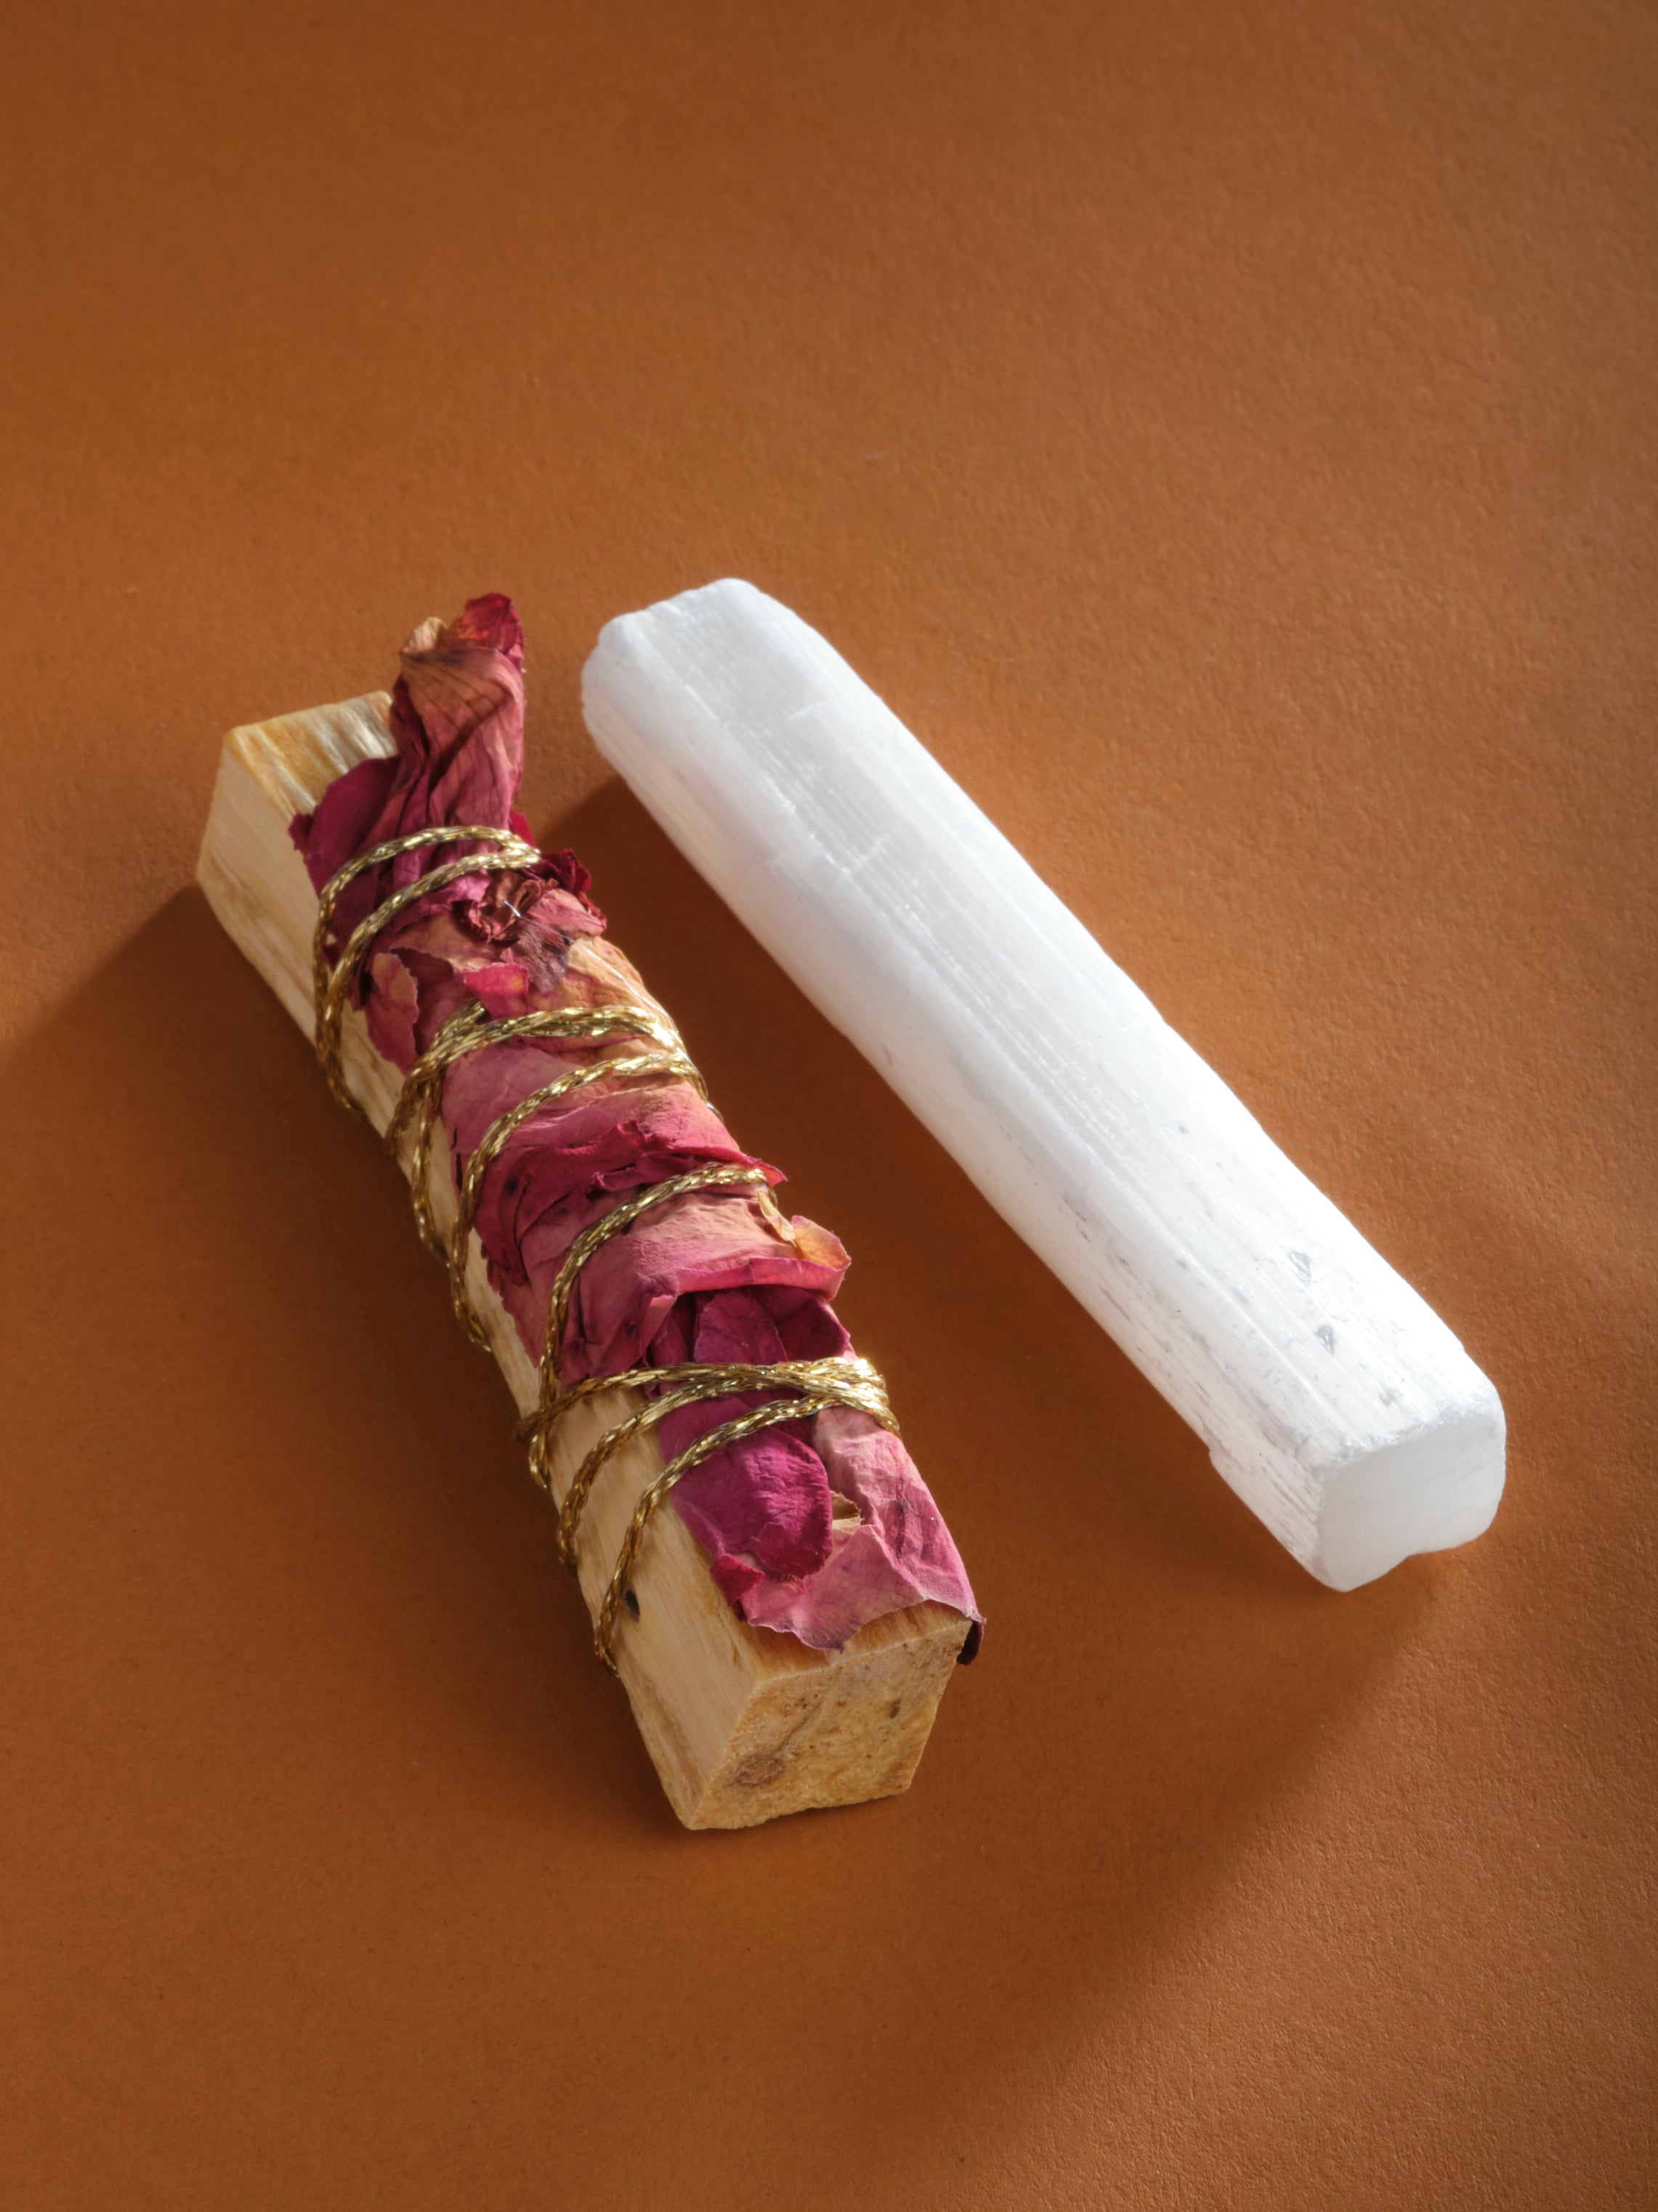 Palo Santo & Selenite product image from My Healing Kit.Item for energy purification